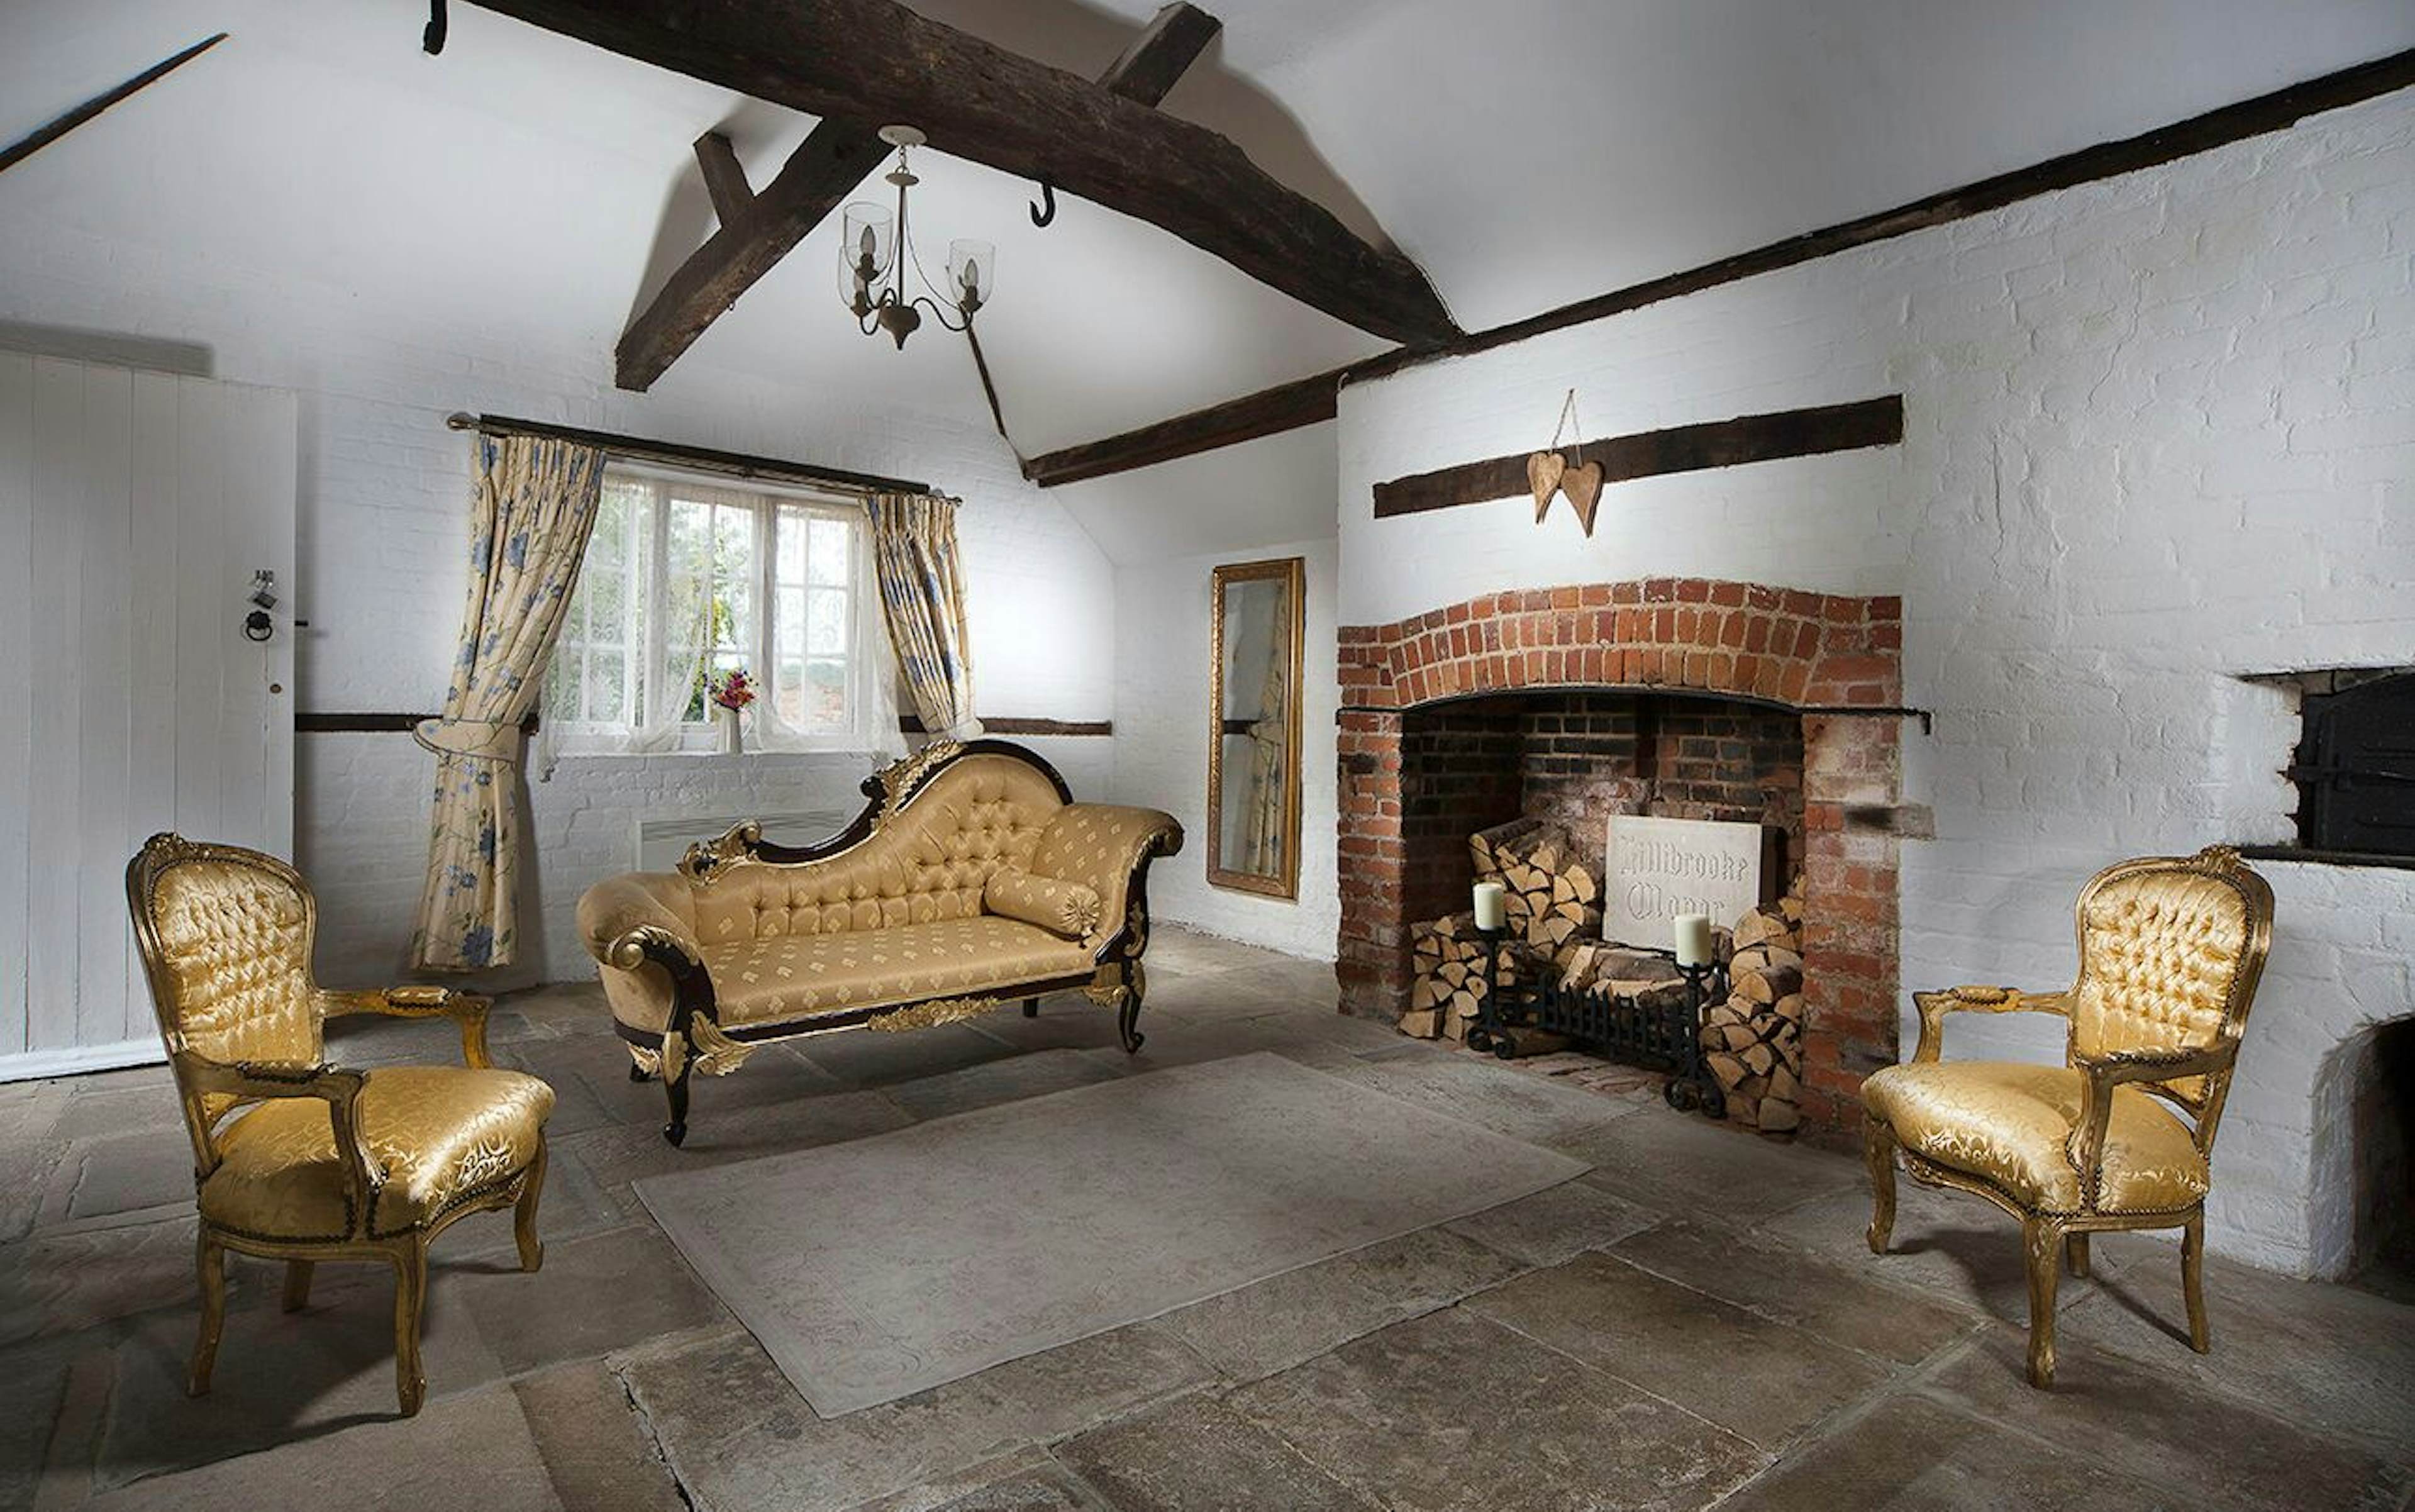 Lillibrooke Manor - The Cottage Room image 1